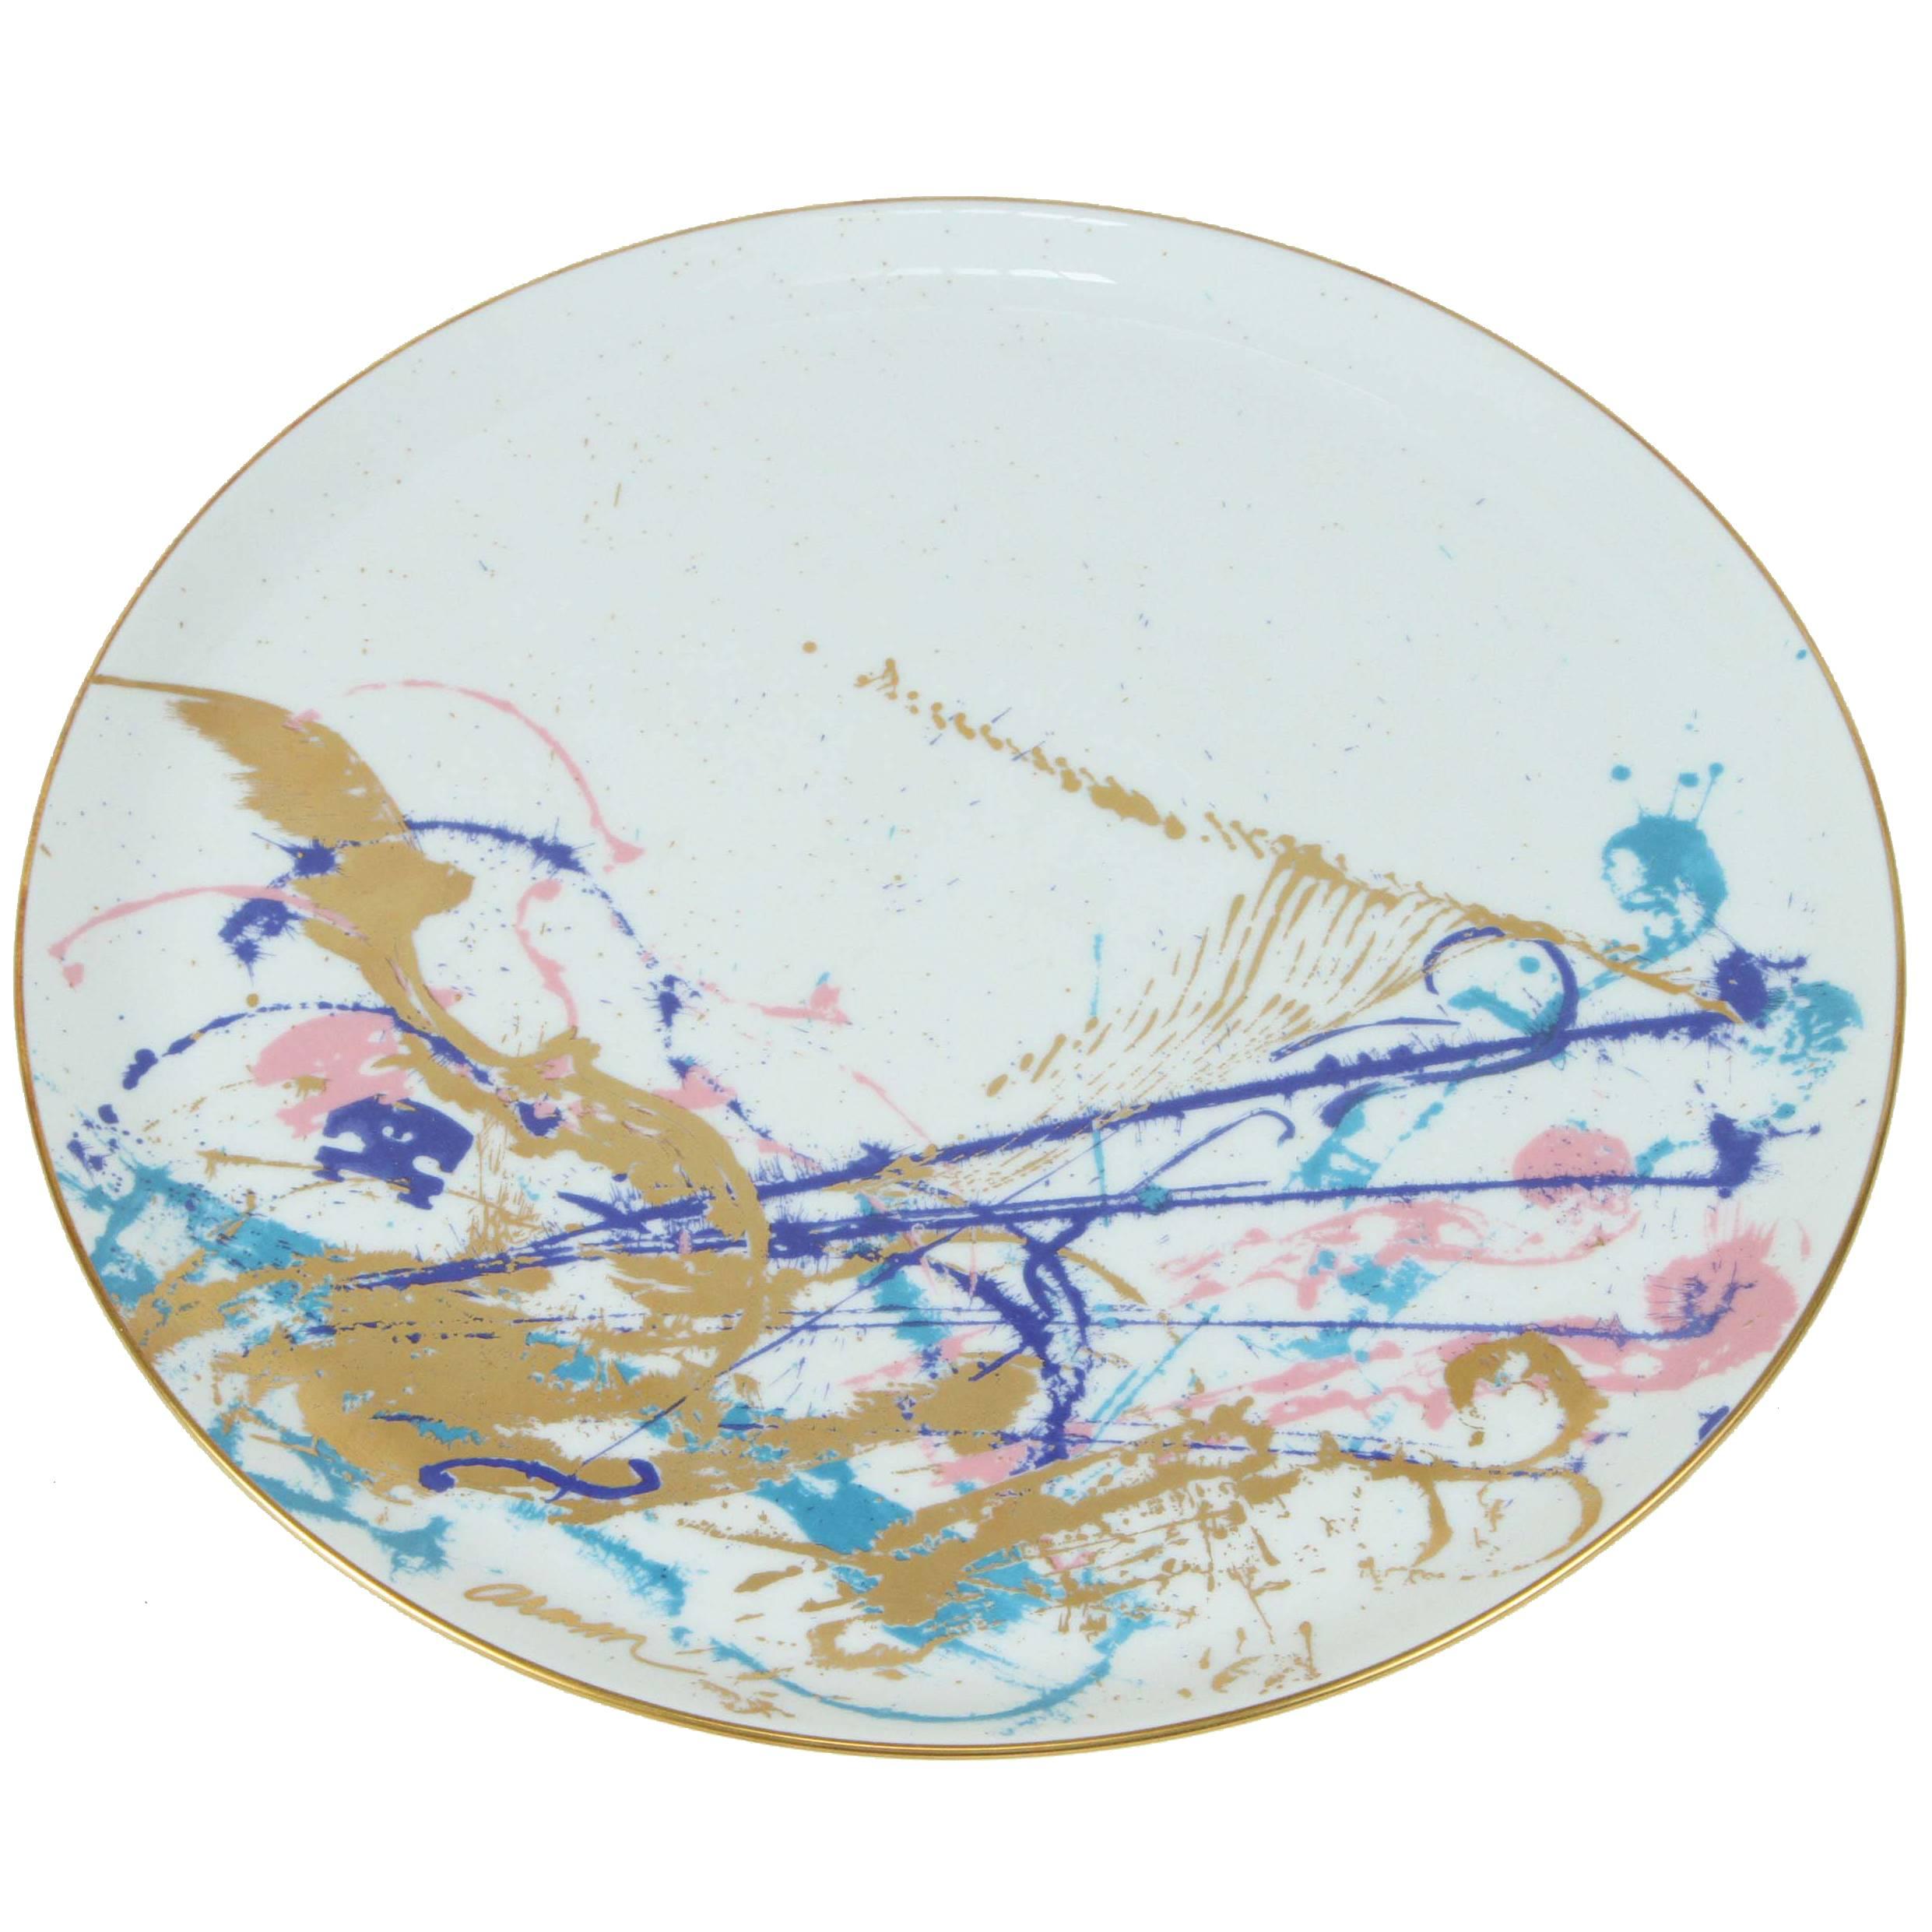 Concerto after Arman, Limited Edition, Plate Number 30 for Rosenthal For Sale